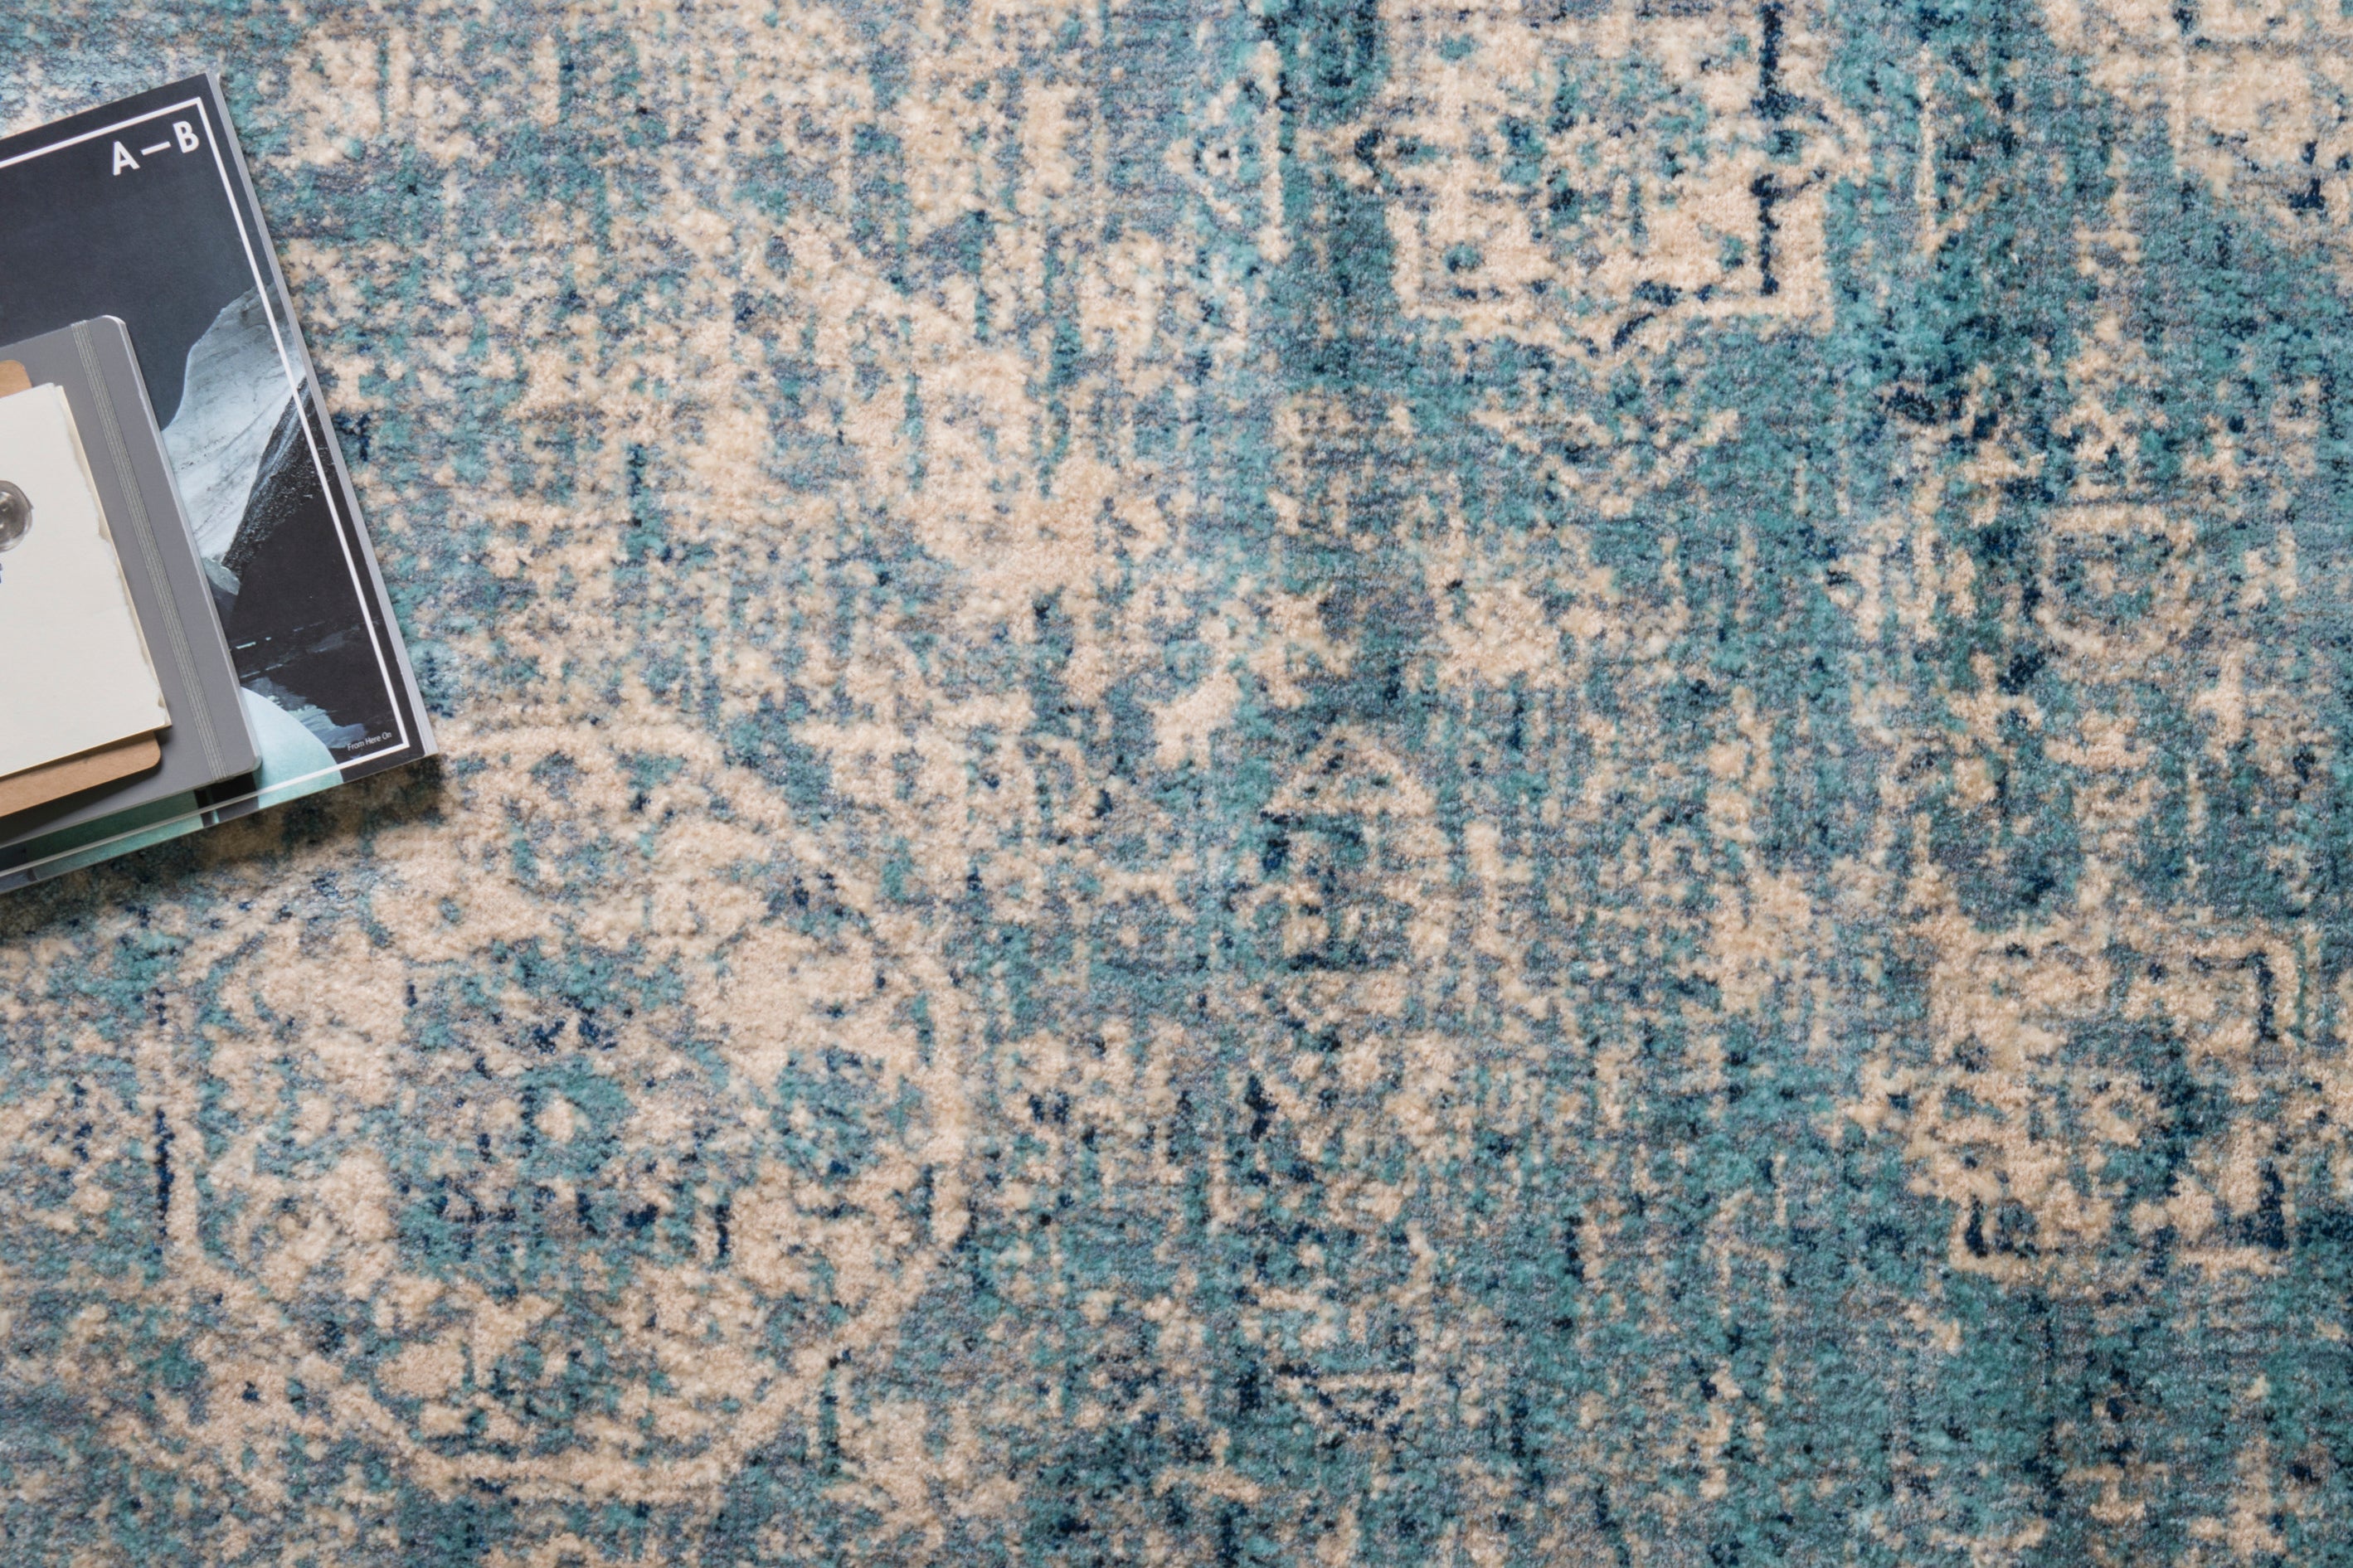 Anastasia Rug in Light Blue & Ivory design by Loloi